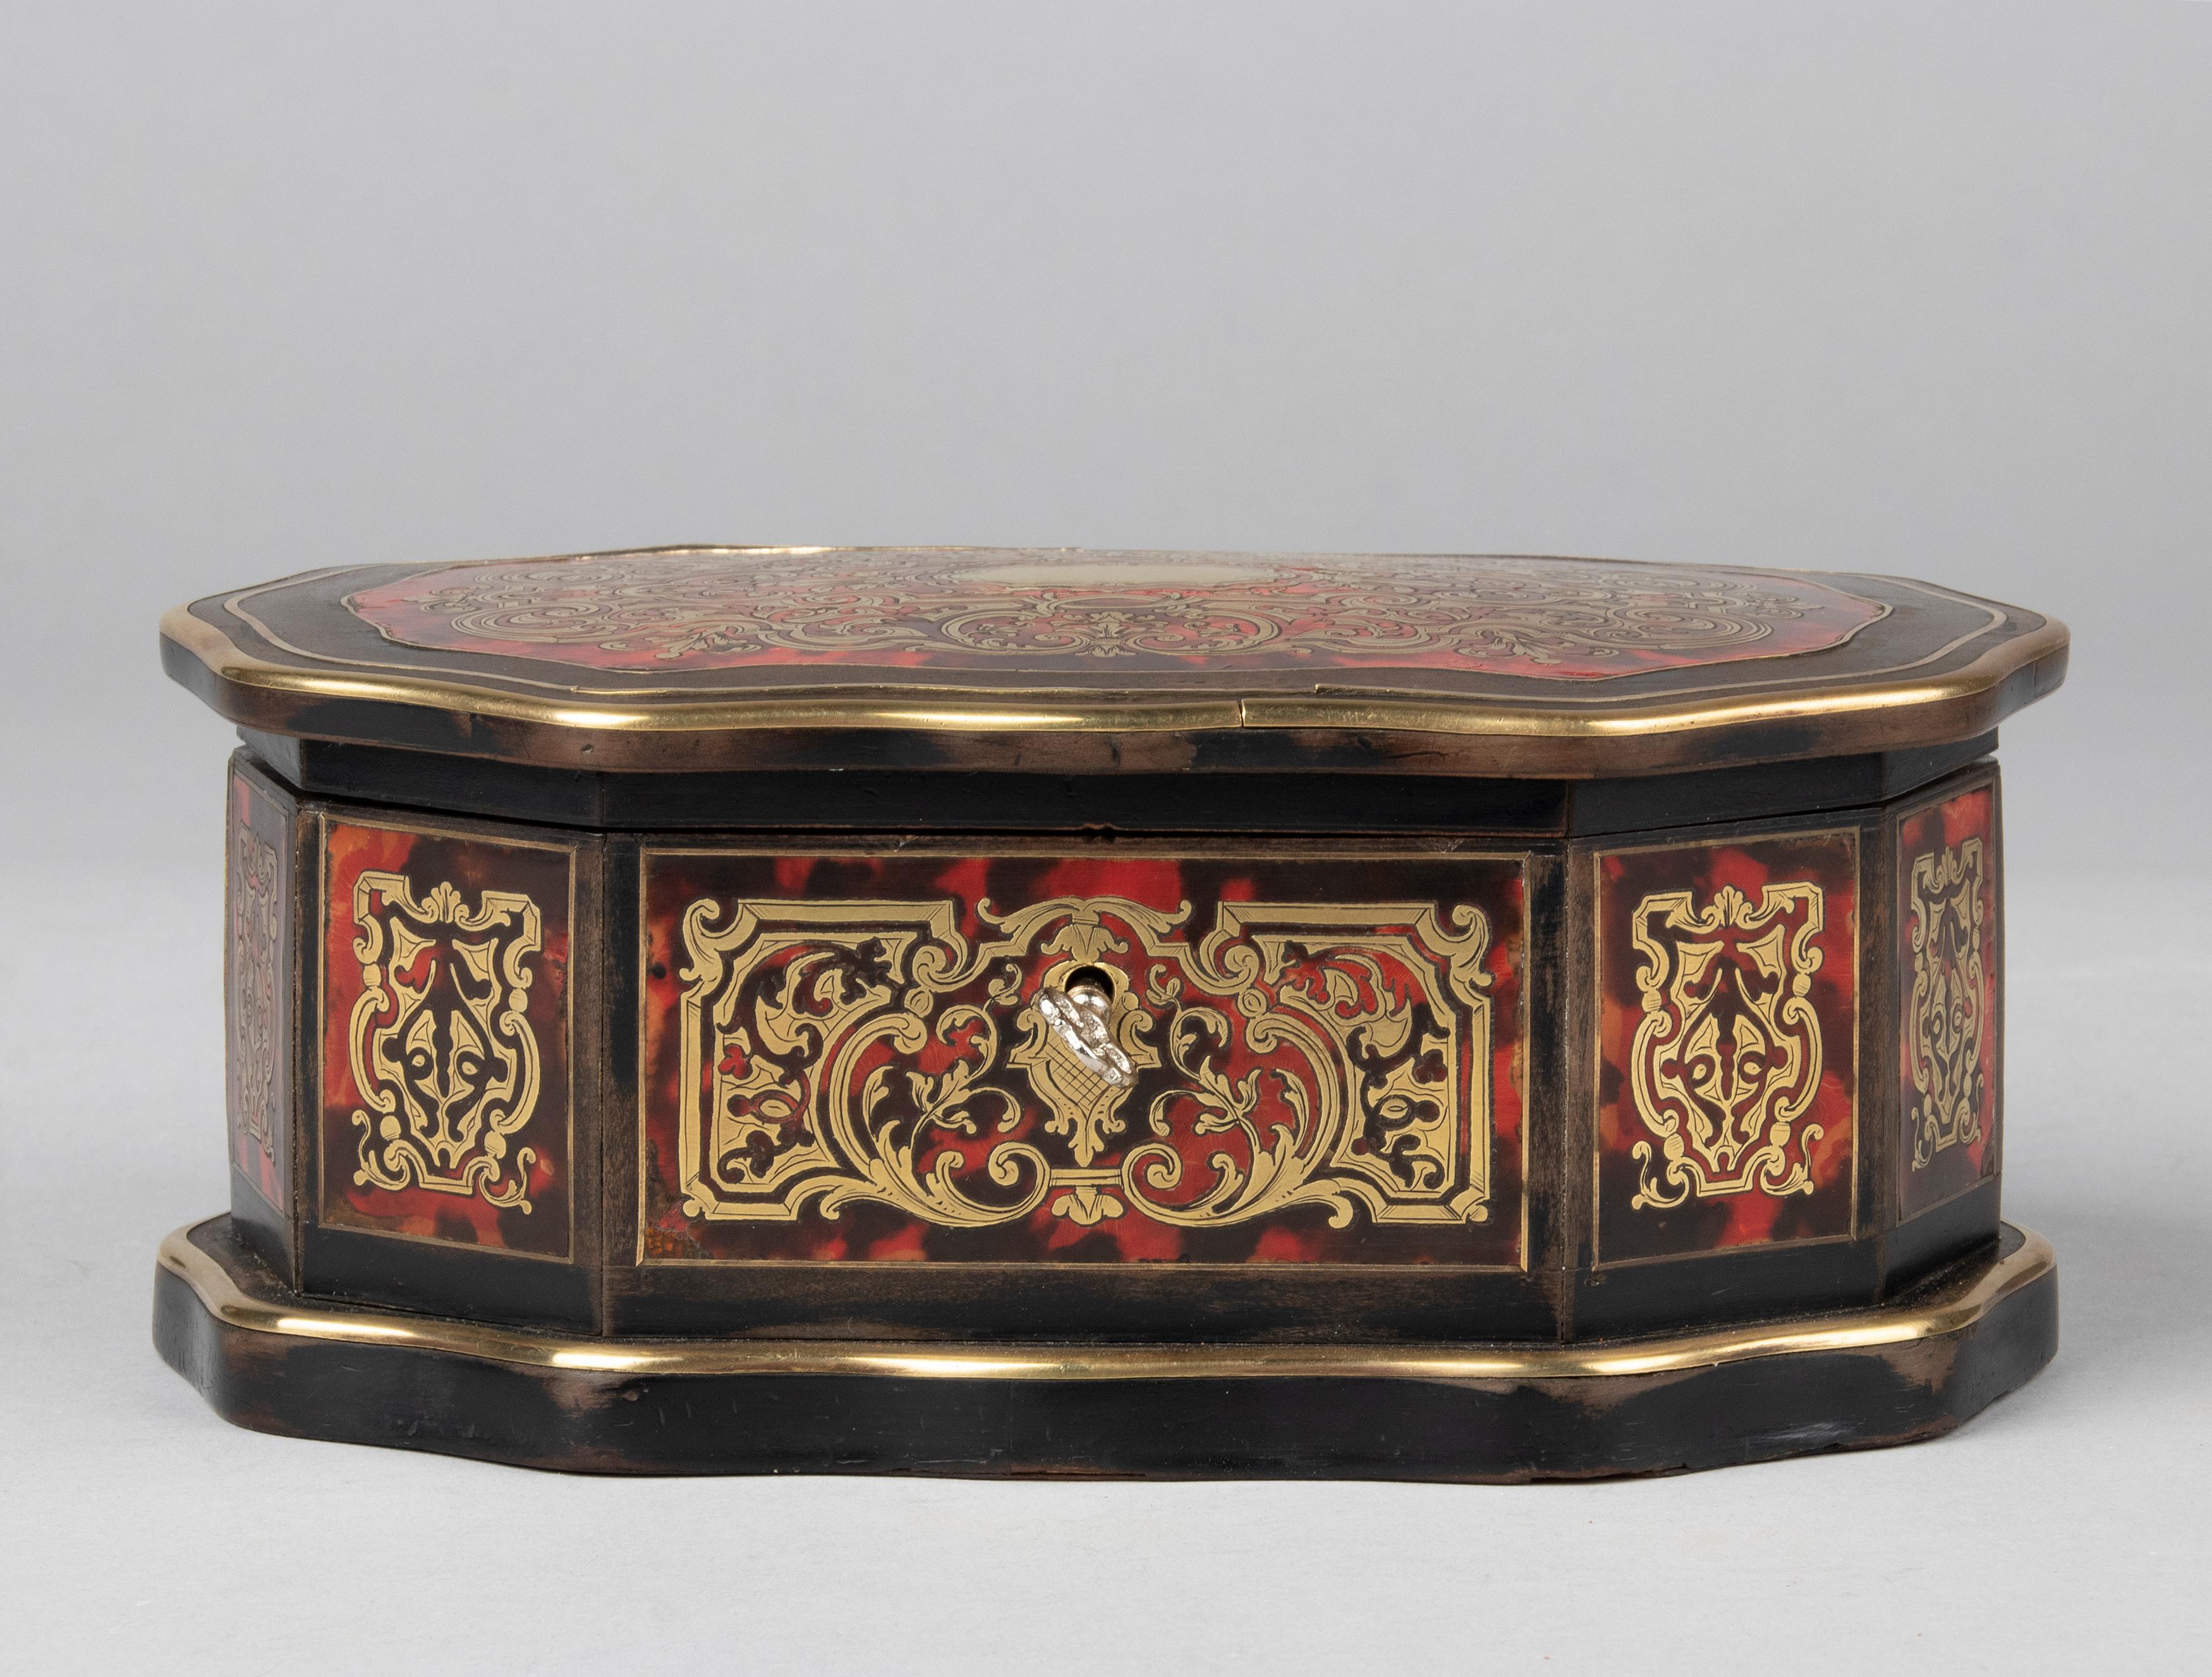 Beautiful and elegant antique French box from the Napoleon III style period.
The box is made of blackened wood, inlaid with boulle and copper marquetry. The box has a working lock with key. The box is in good condition. The interior is lined with